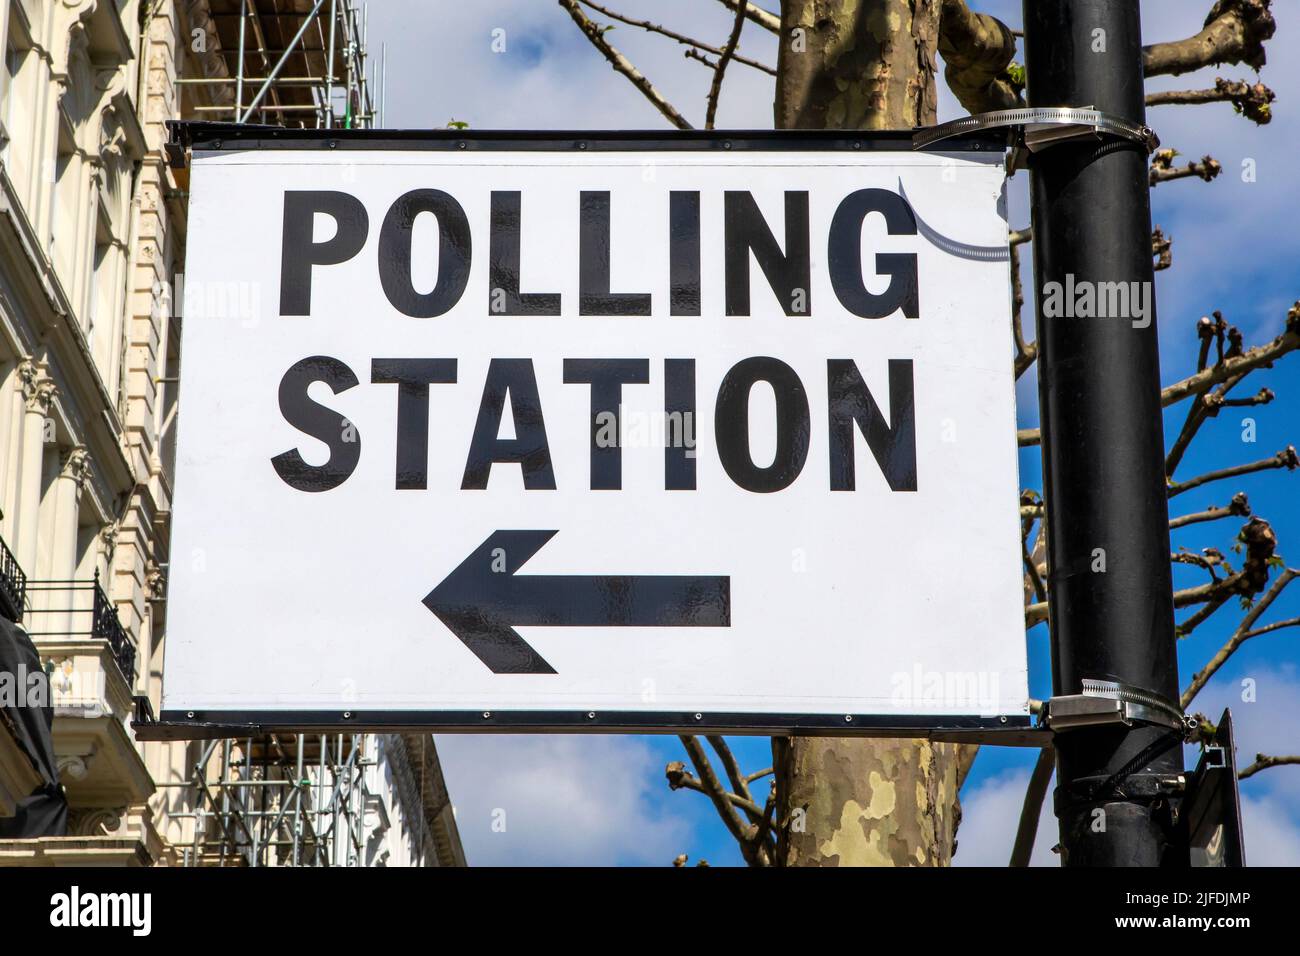 A sign for a Polling Station during a local election in central London, UK. Stock Photo